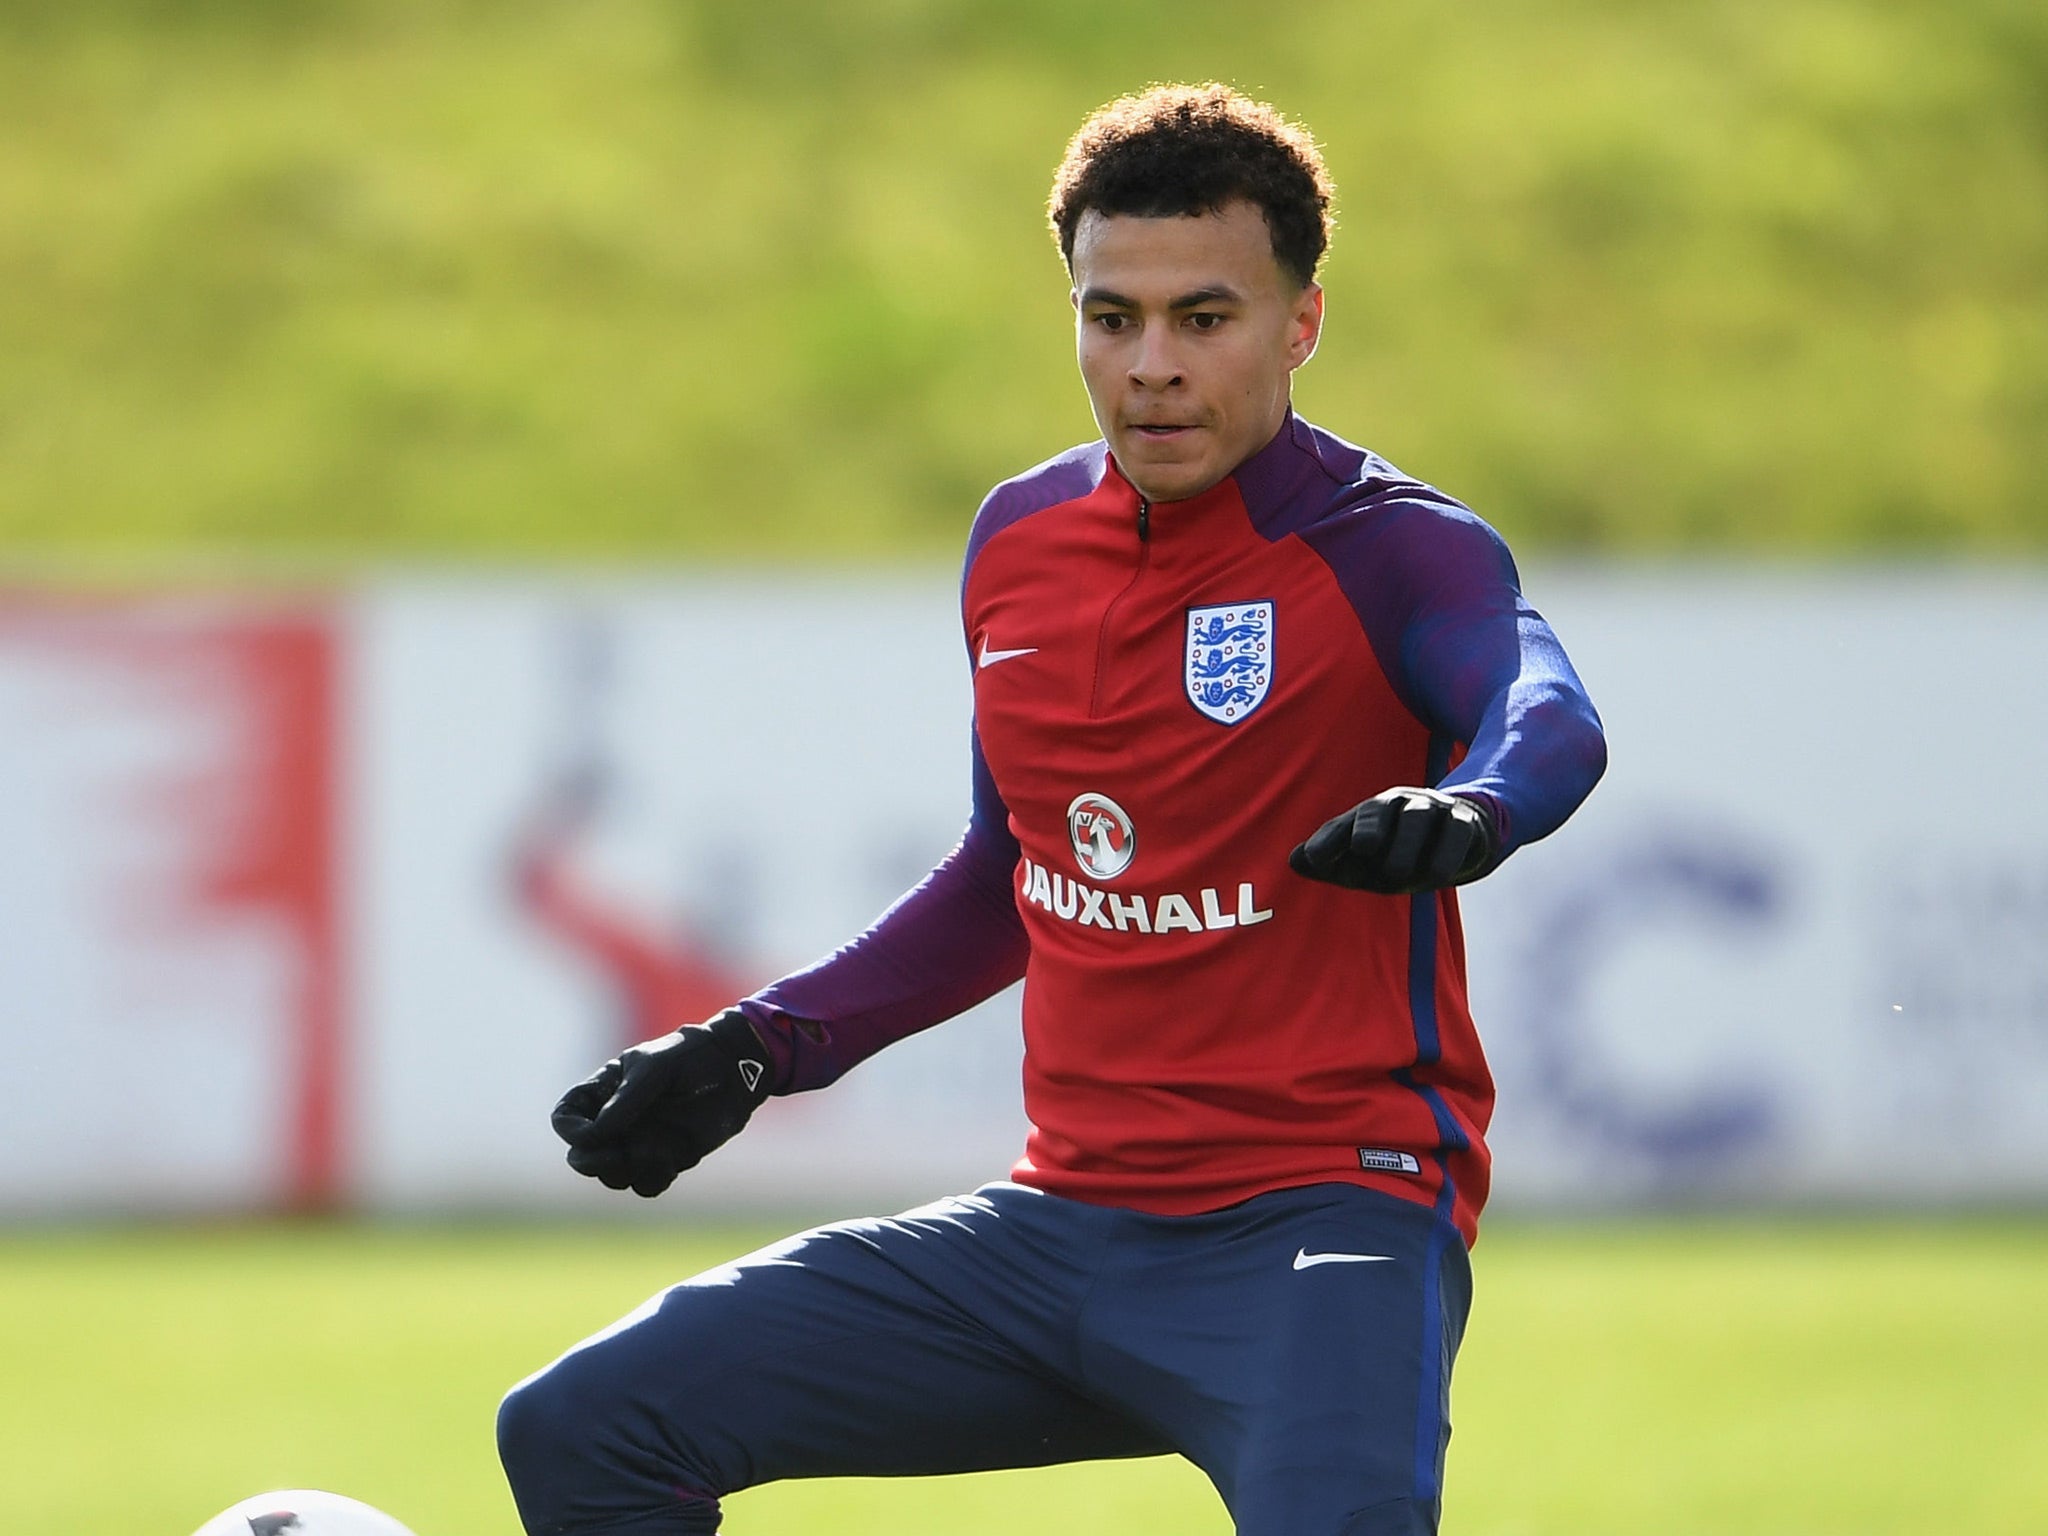 Dele Alli's edge will be tested in a fiery qualifier against Scotland at Hampden Park